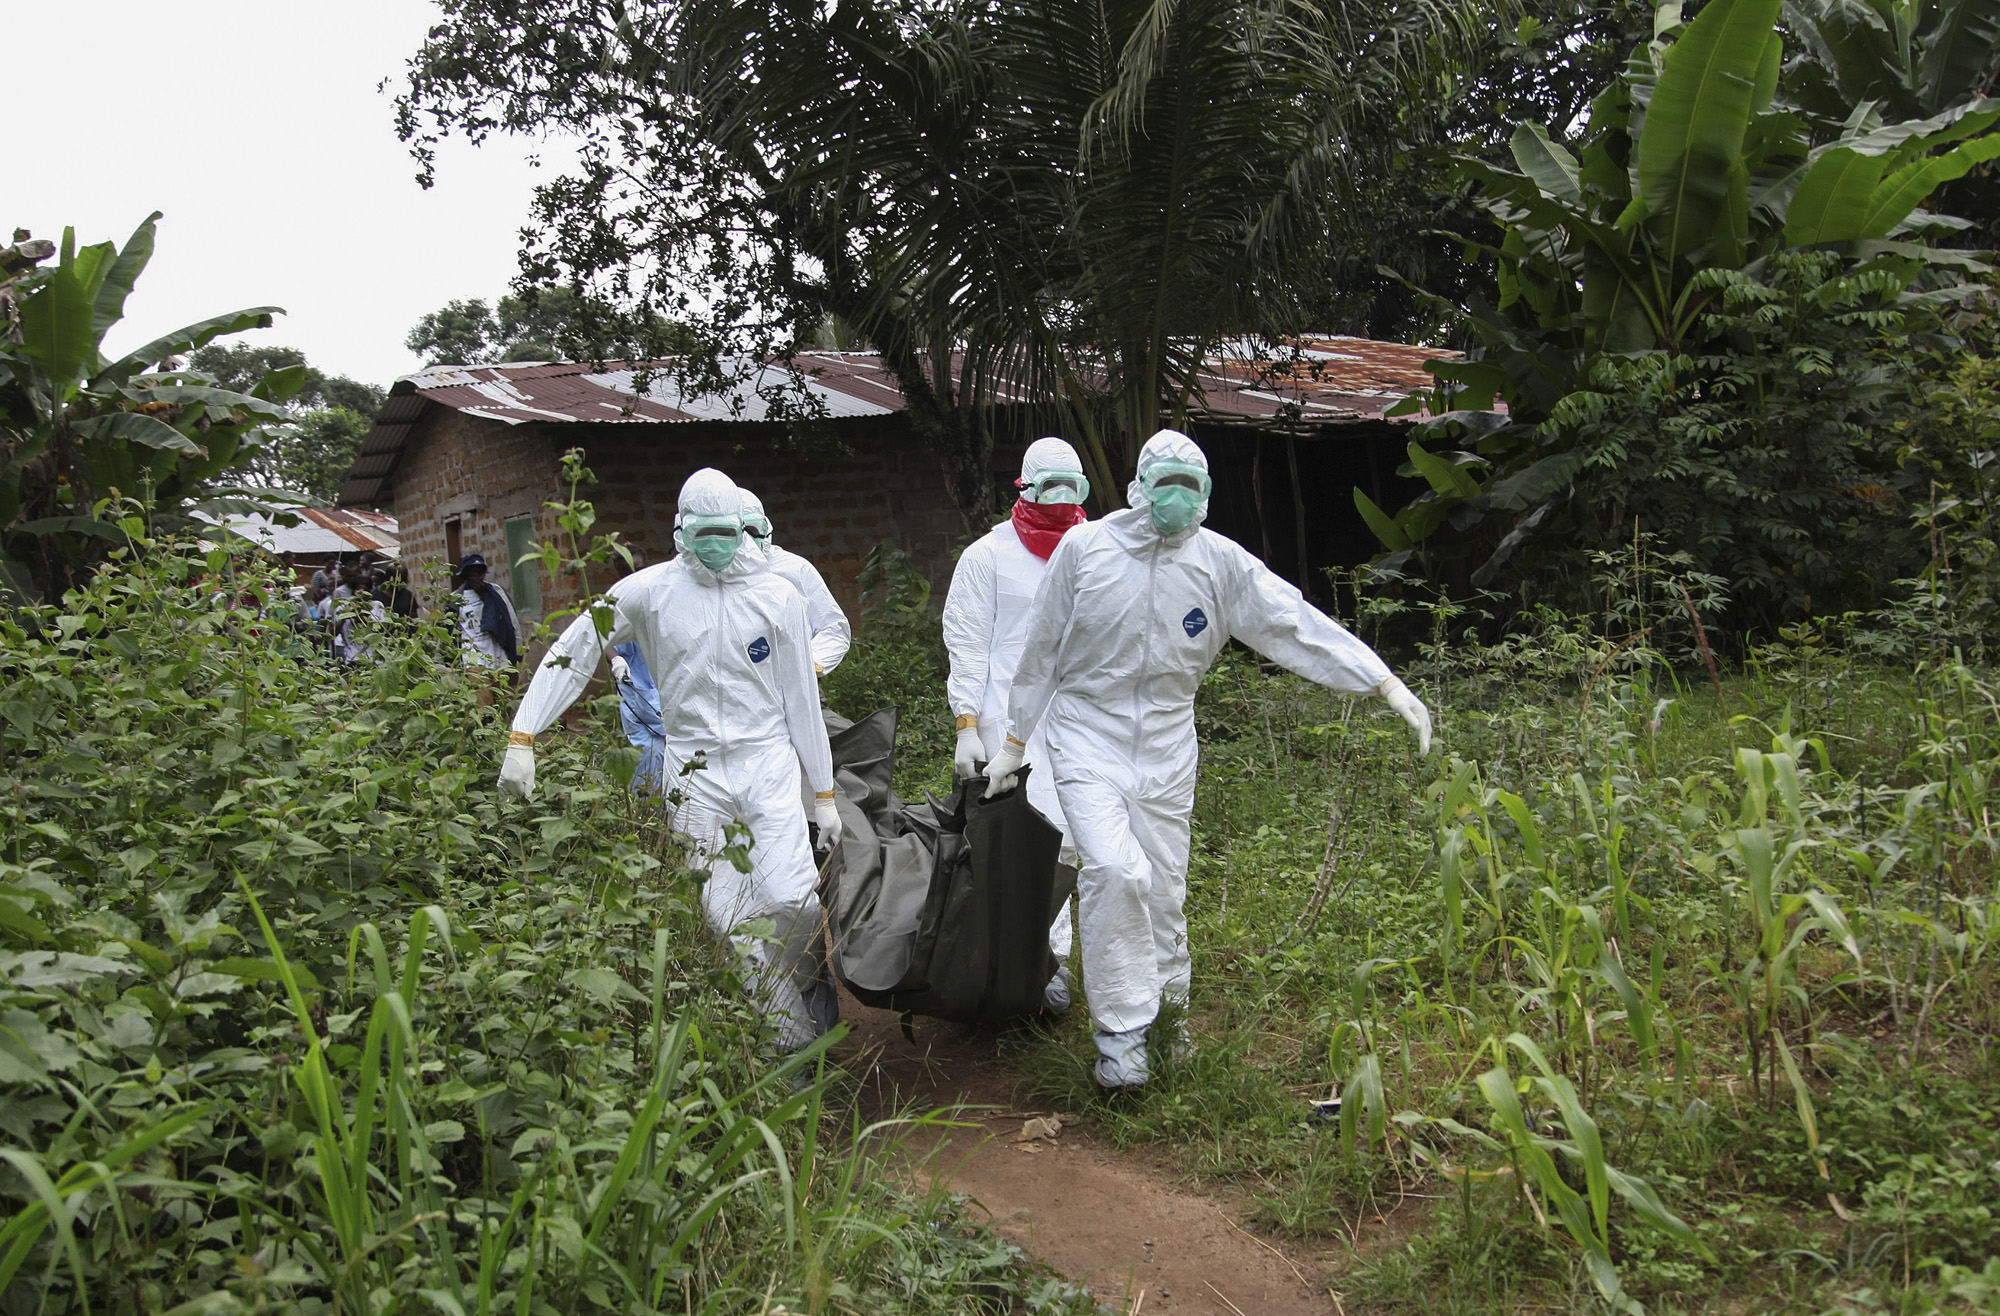 Liberian nurses carry the body of an Ebola victim on the way to bury them in the Banjor Community on the outskirts of Monrovia, Liberia, Aug. 6, 2014. (Ahmed Jallanzo—EPA)